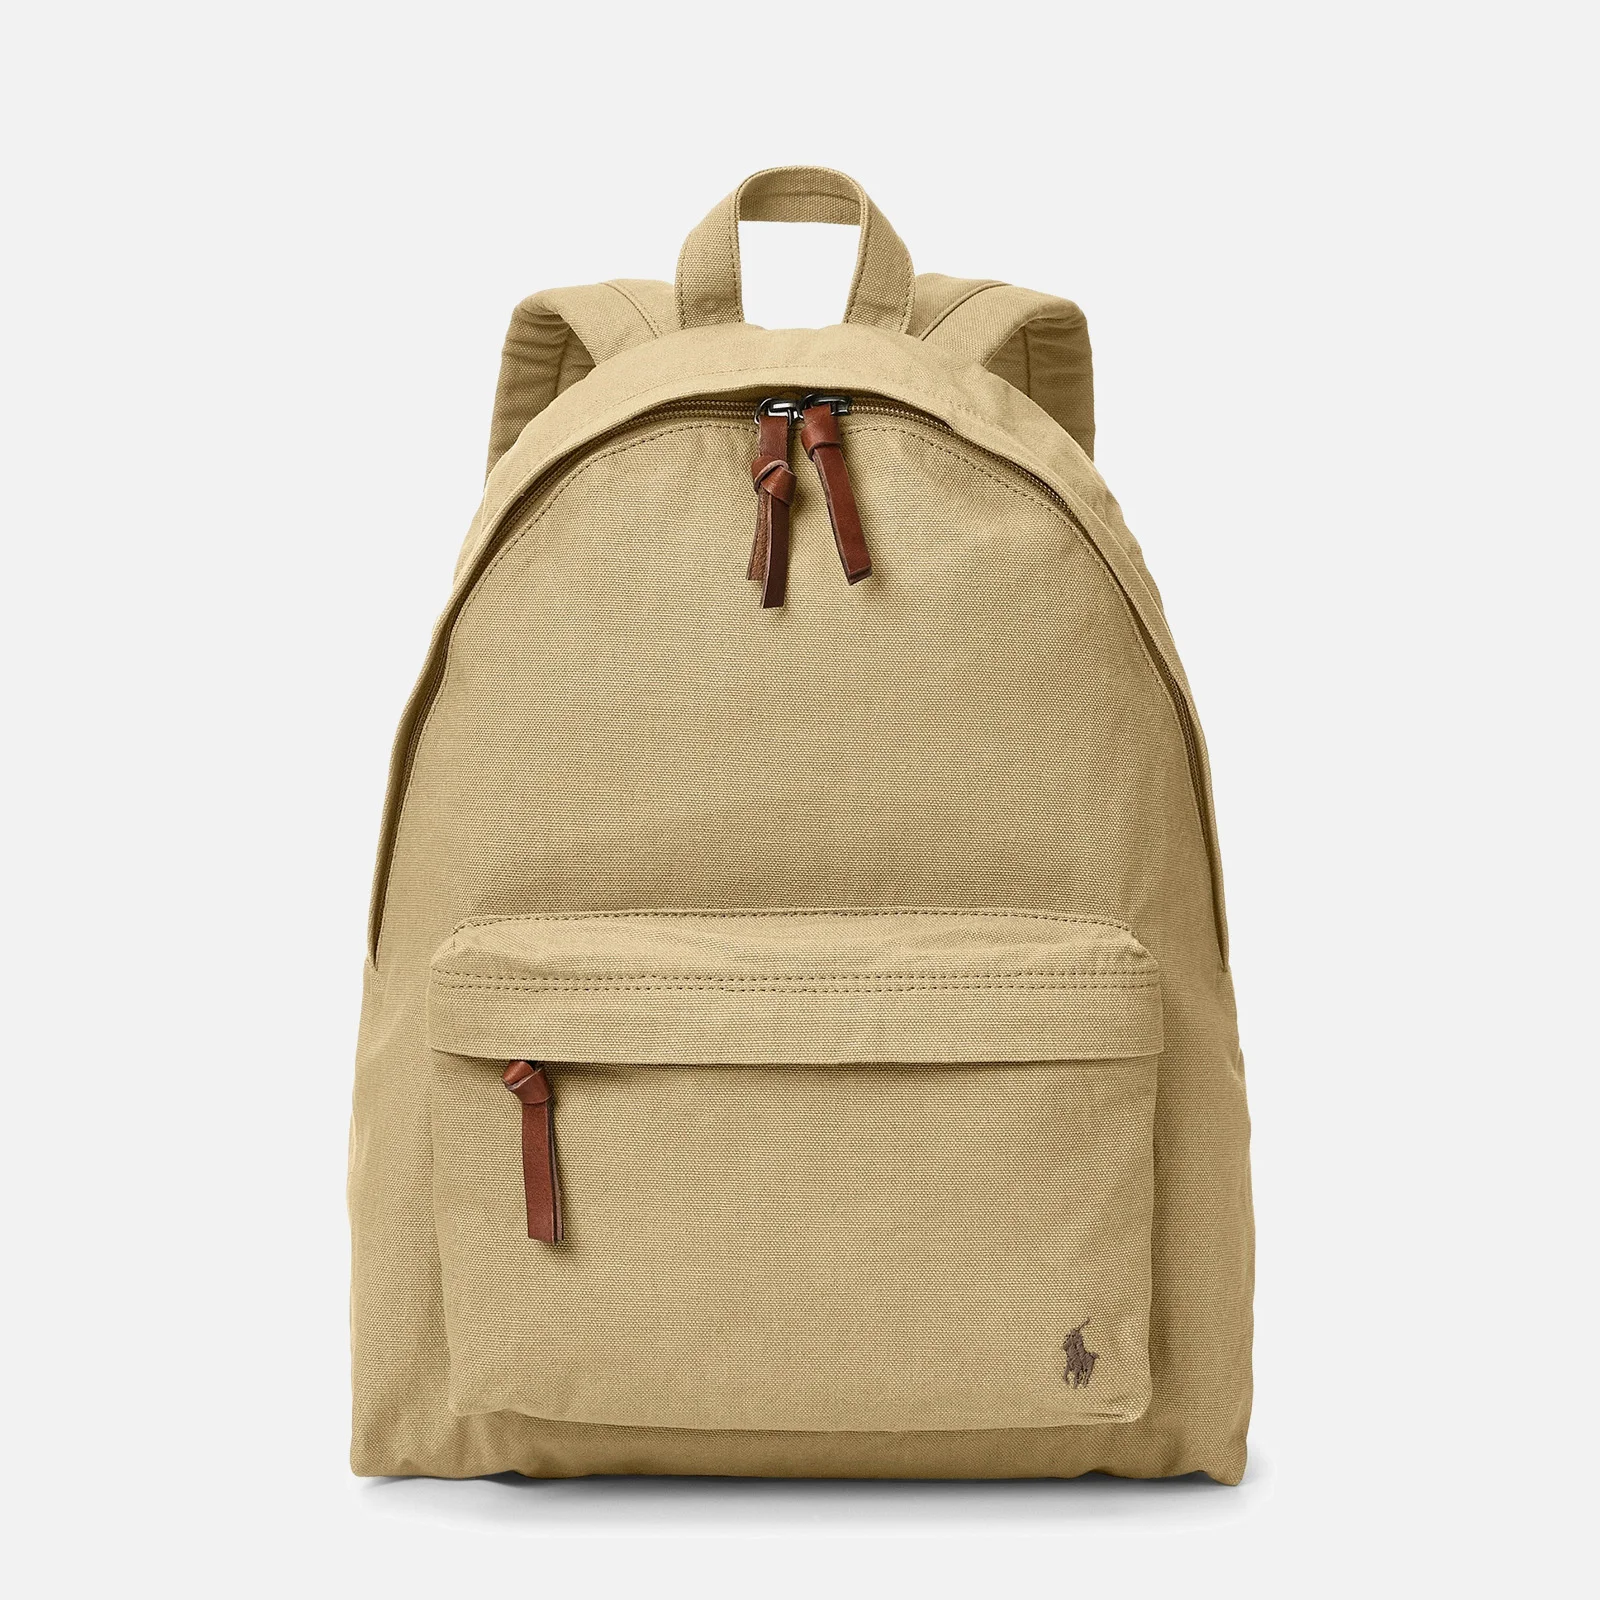 Polo Ralph Lauren Canvas Backpack Image 1